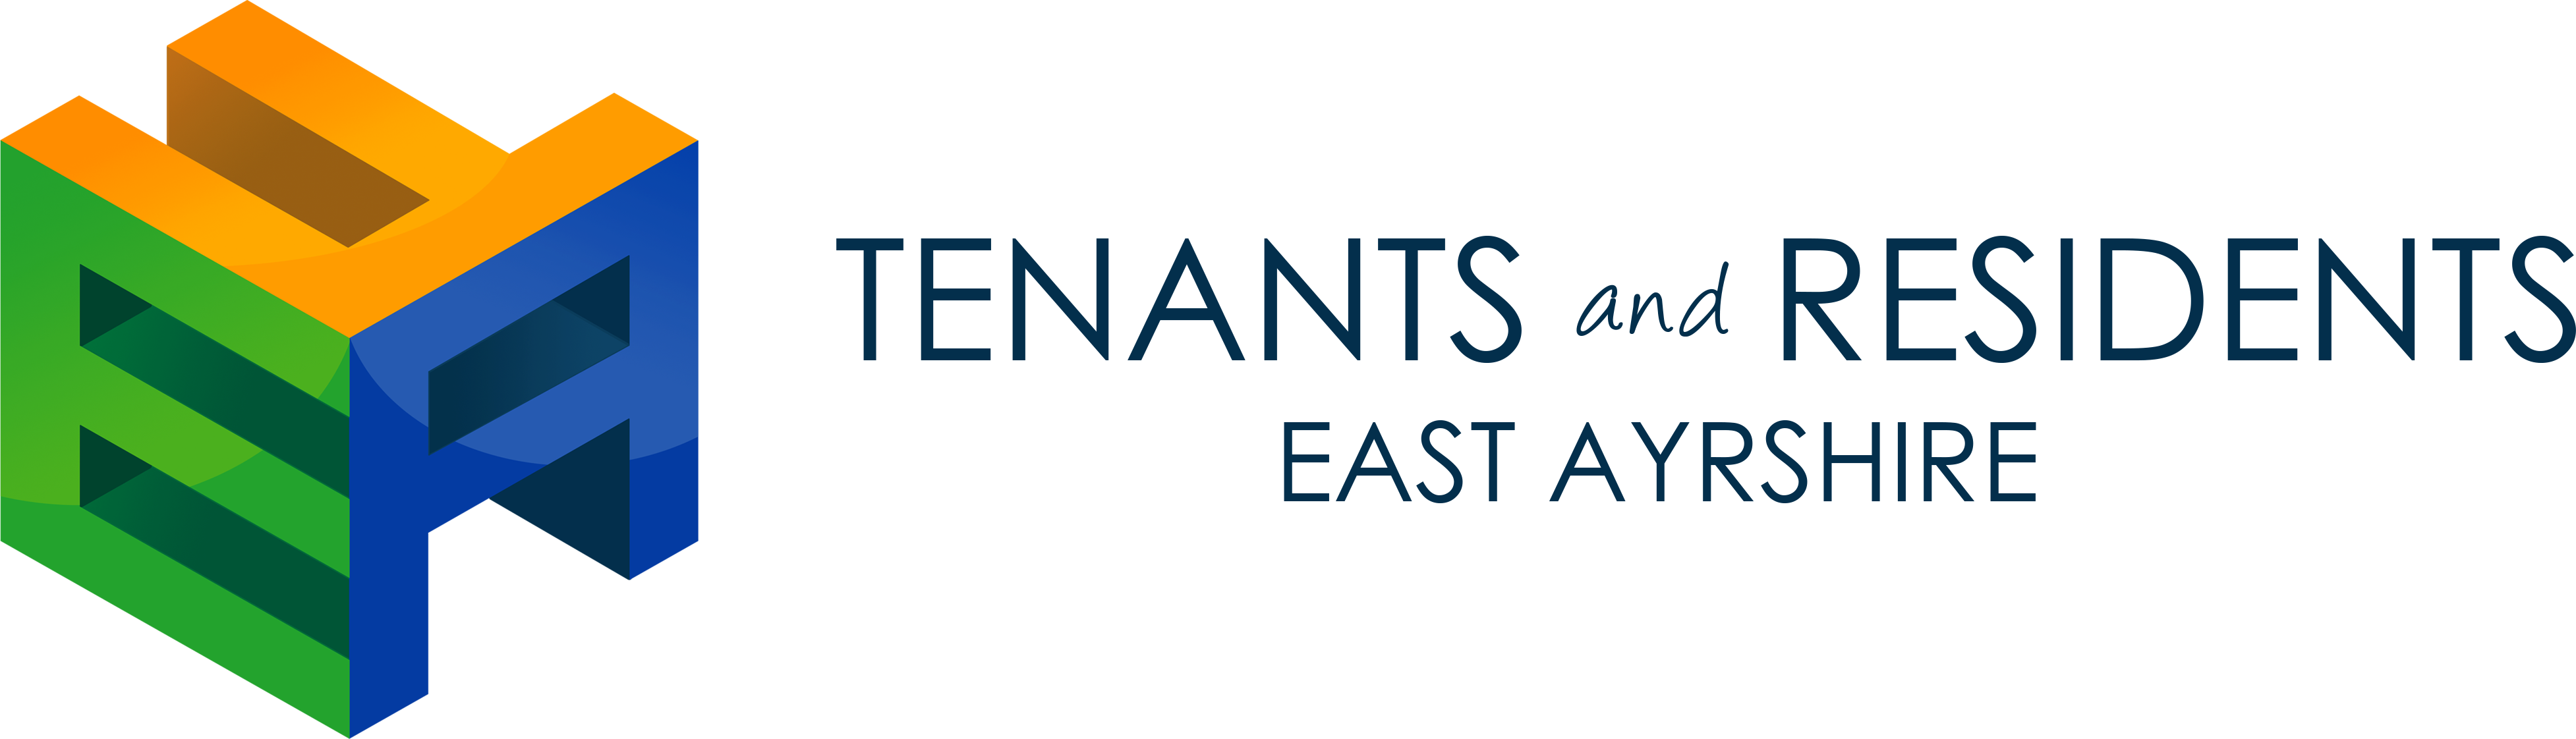 East Ayrshire Tenants and Residents Federation